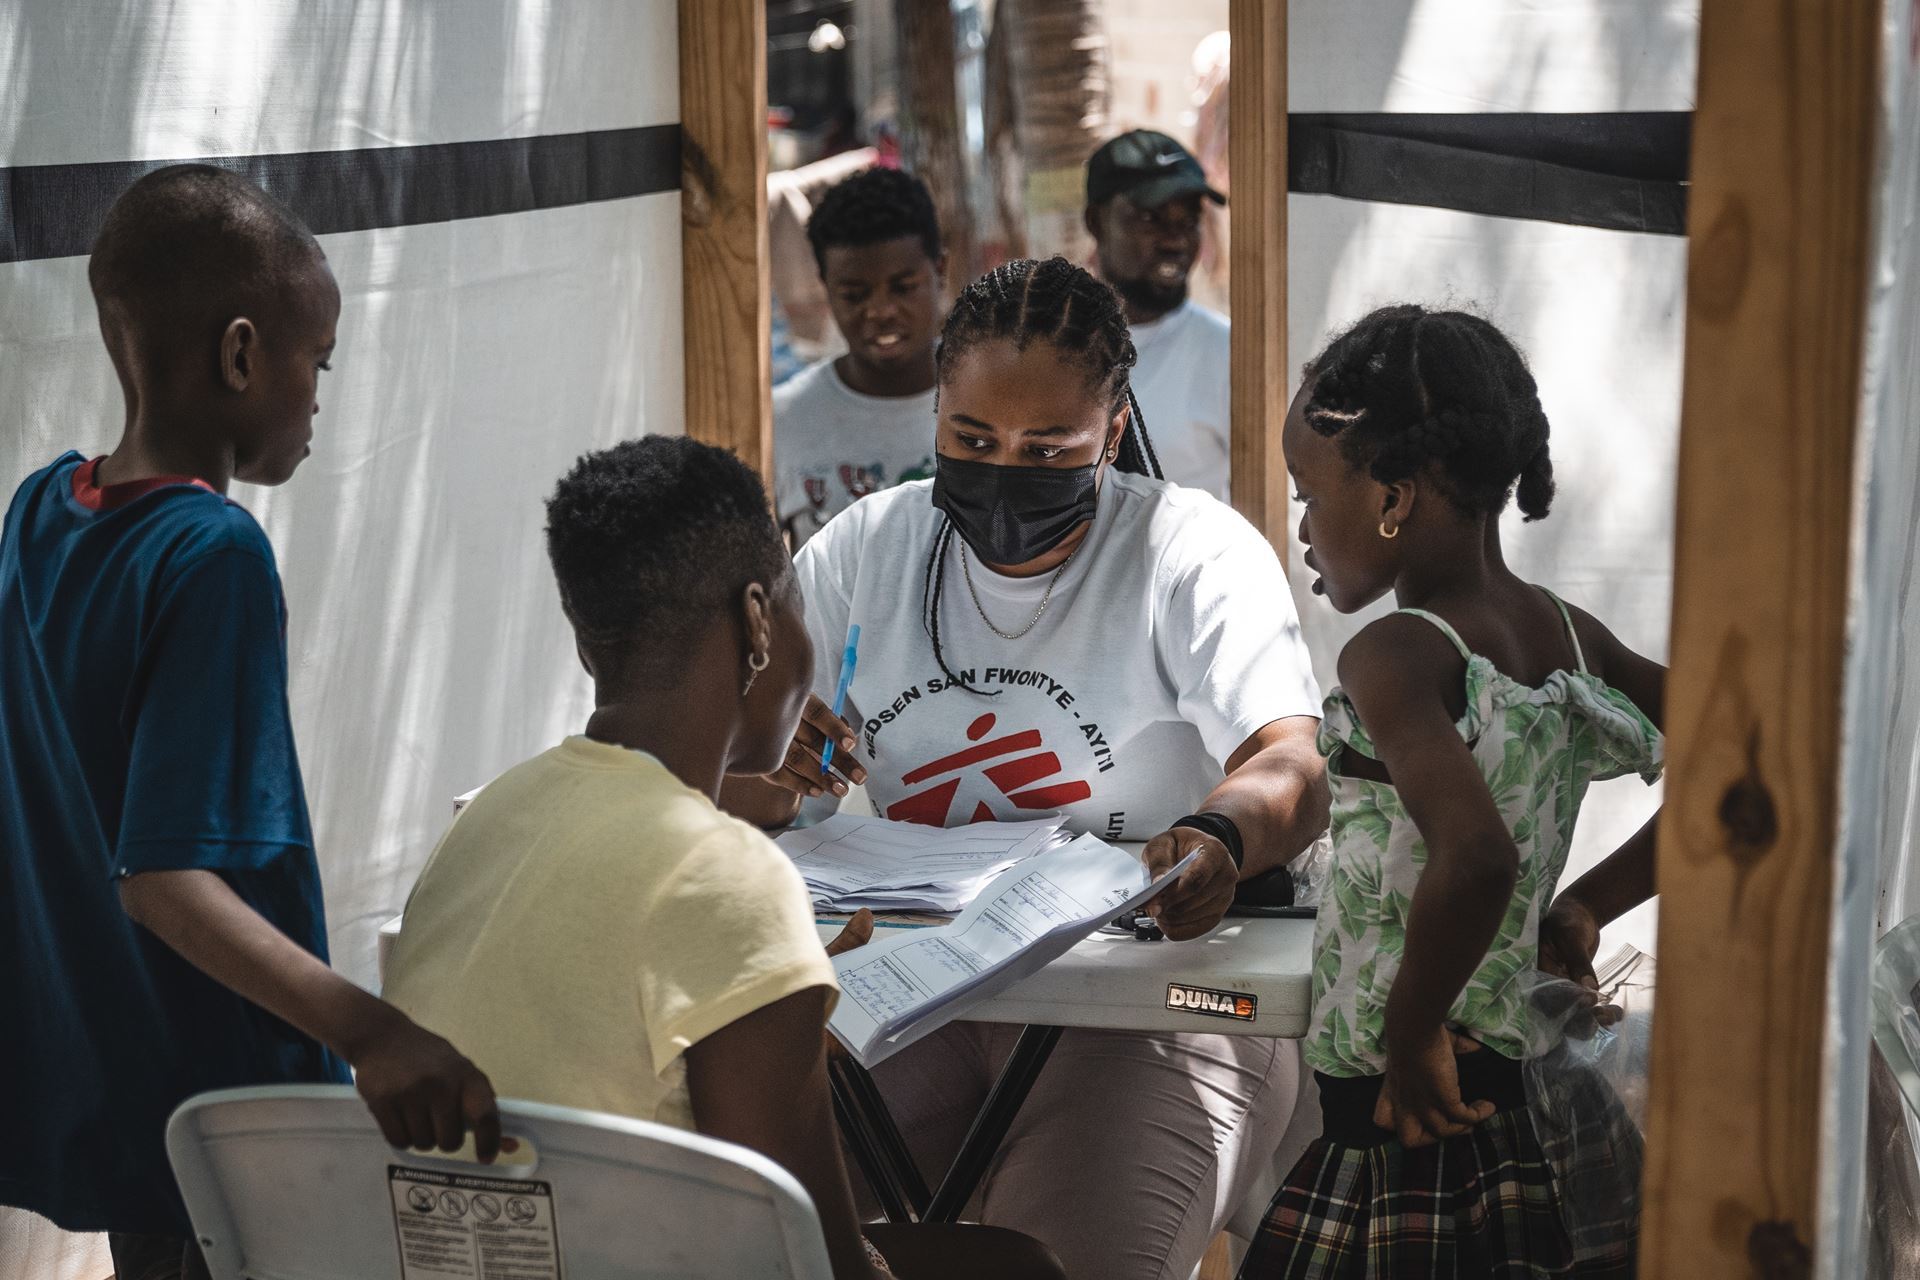 MSF staff speaking to a family